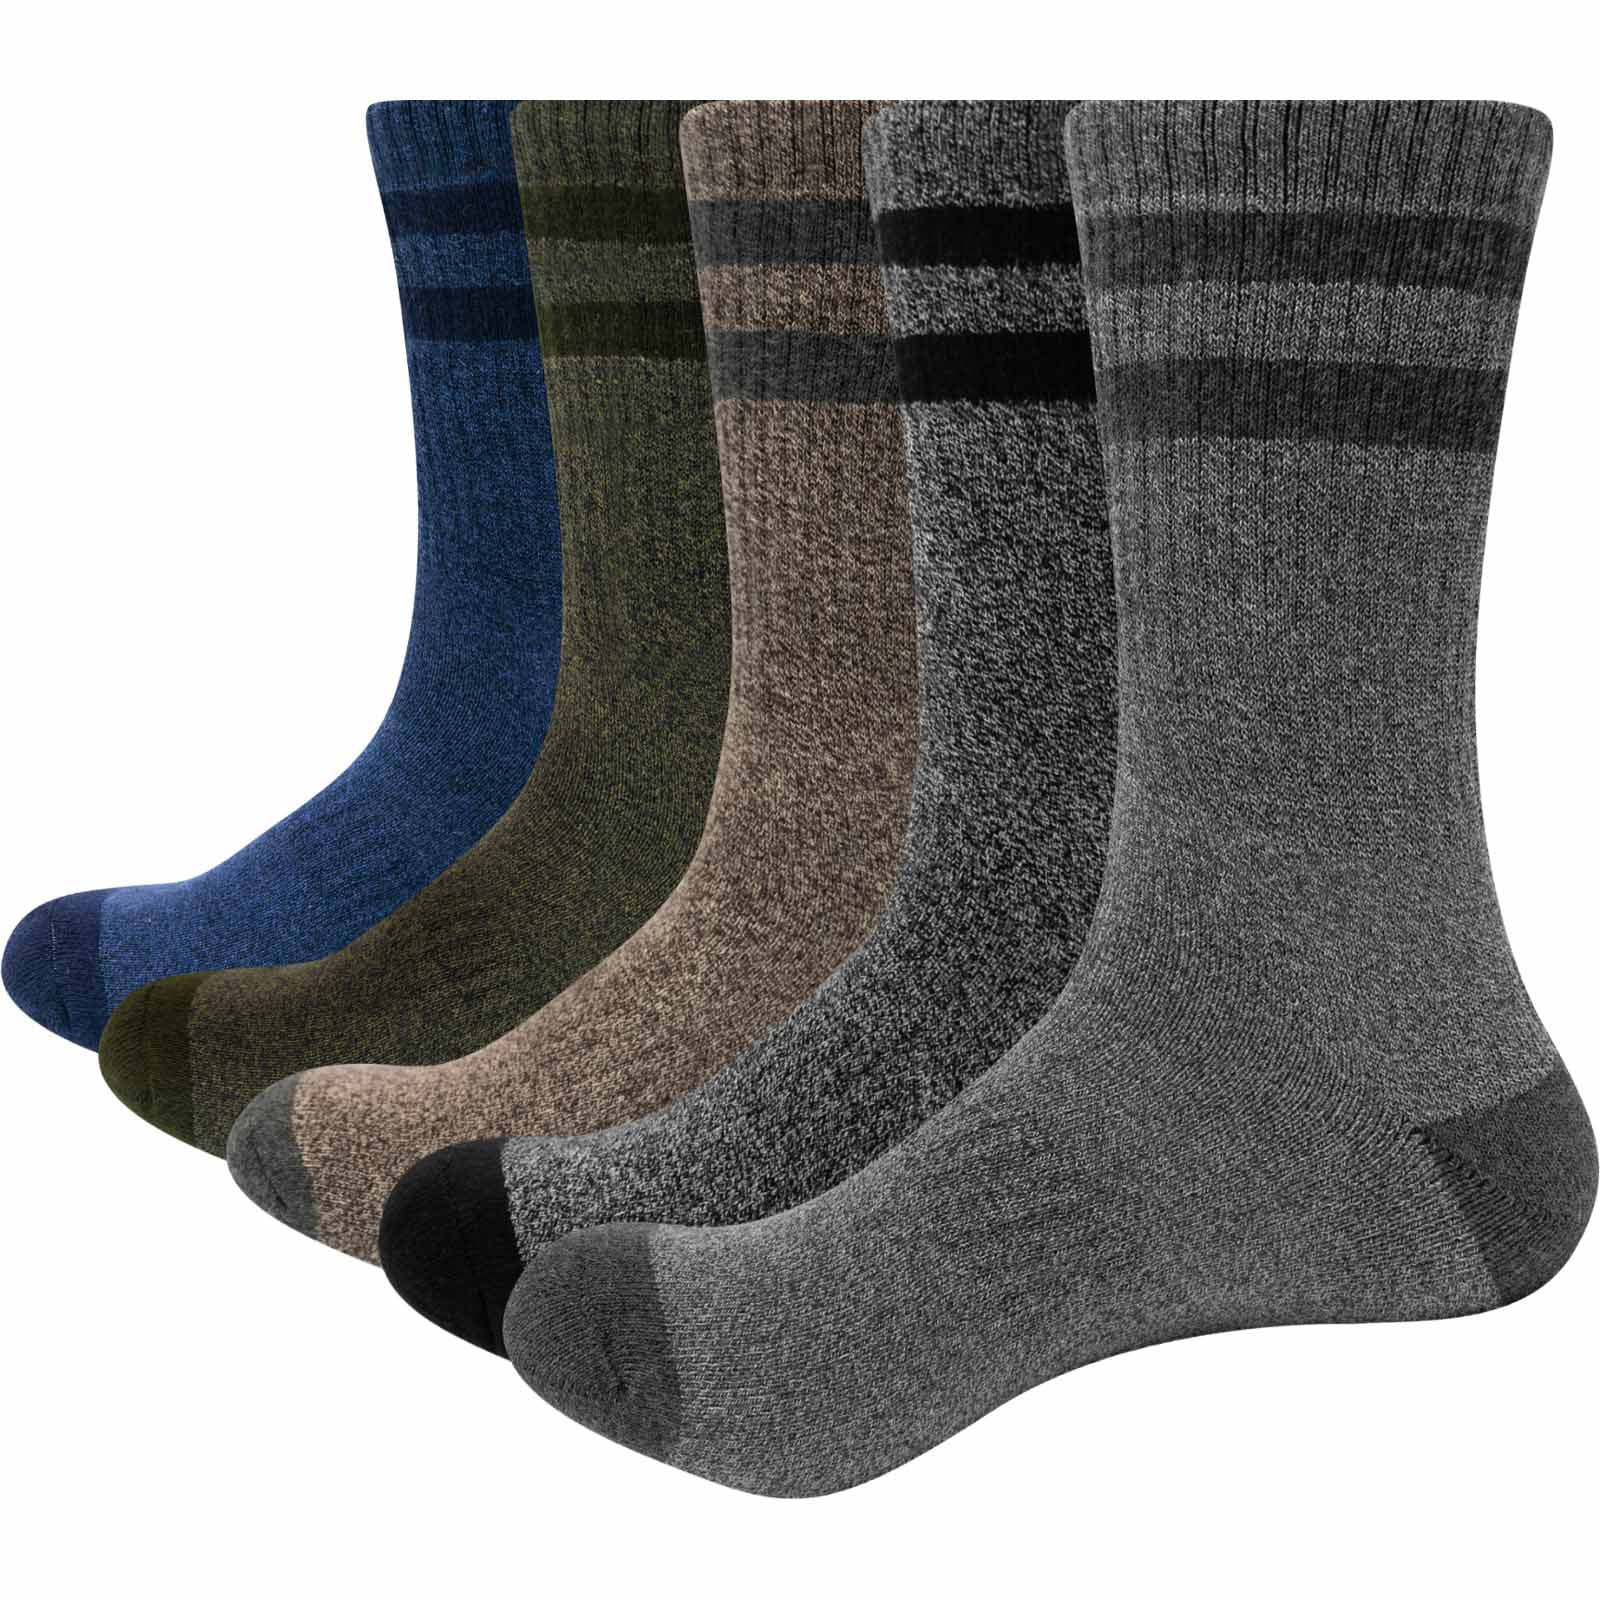 Mens Warm Wool Socks 5 Pairs Heavy Thick Soft Comfort Thermal Winter Crew Socks One Size 6-12 